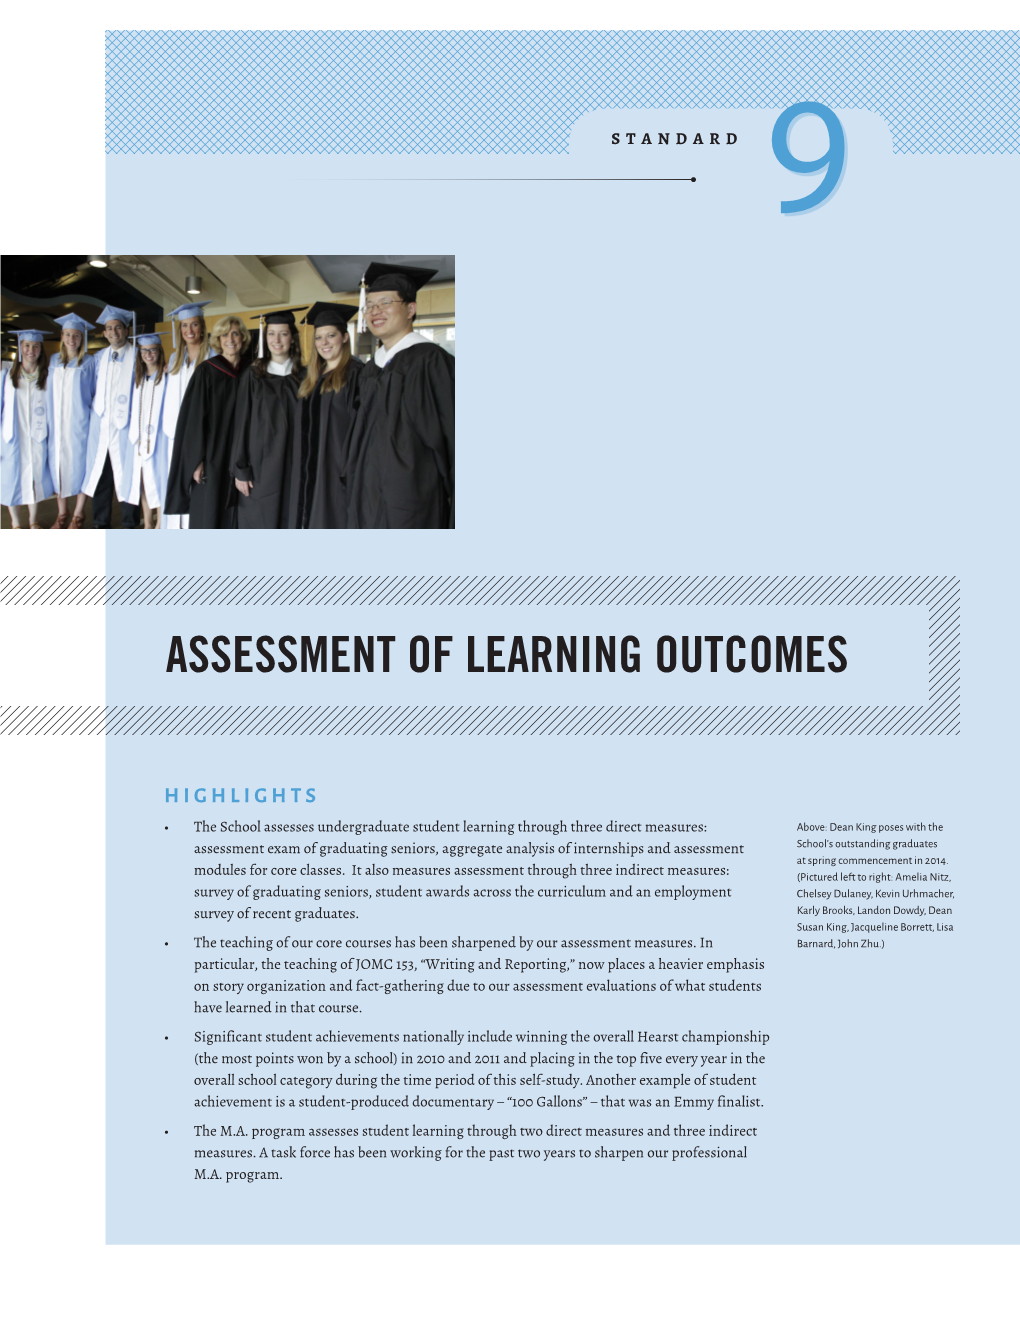 Assessment of Learning Outcomes